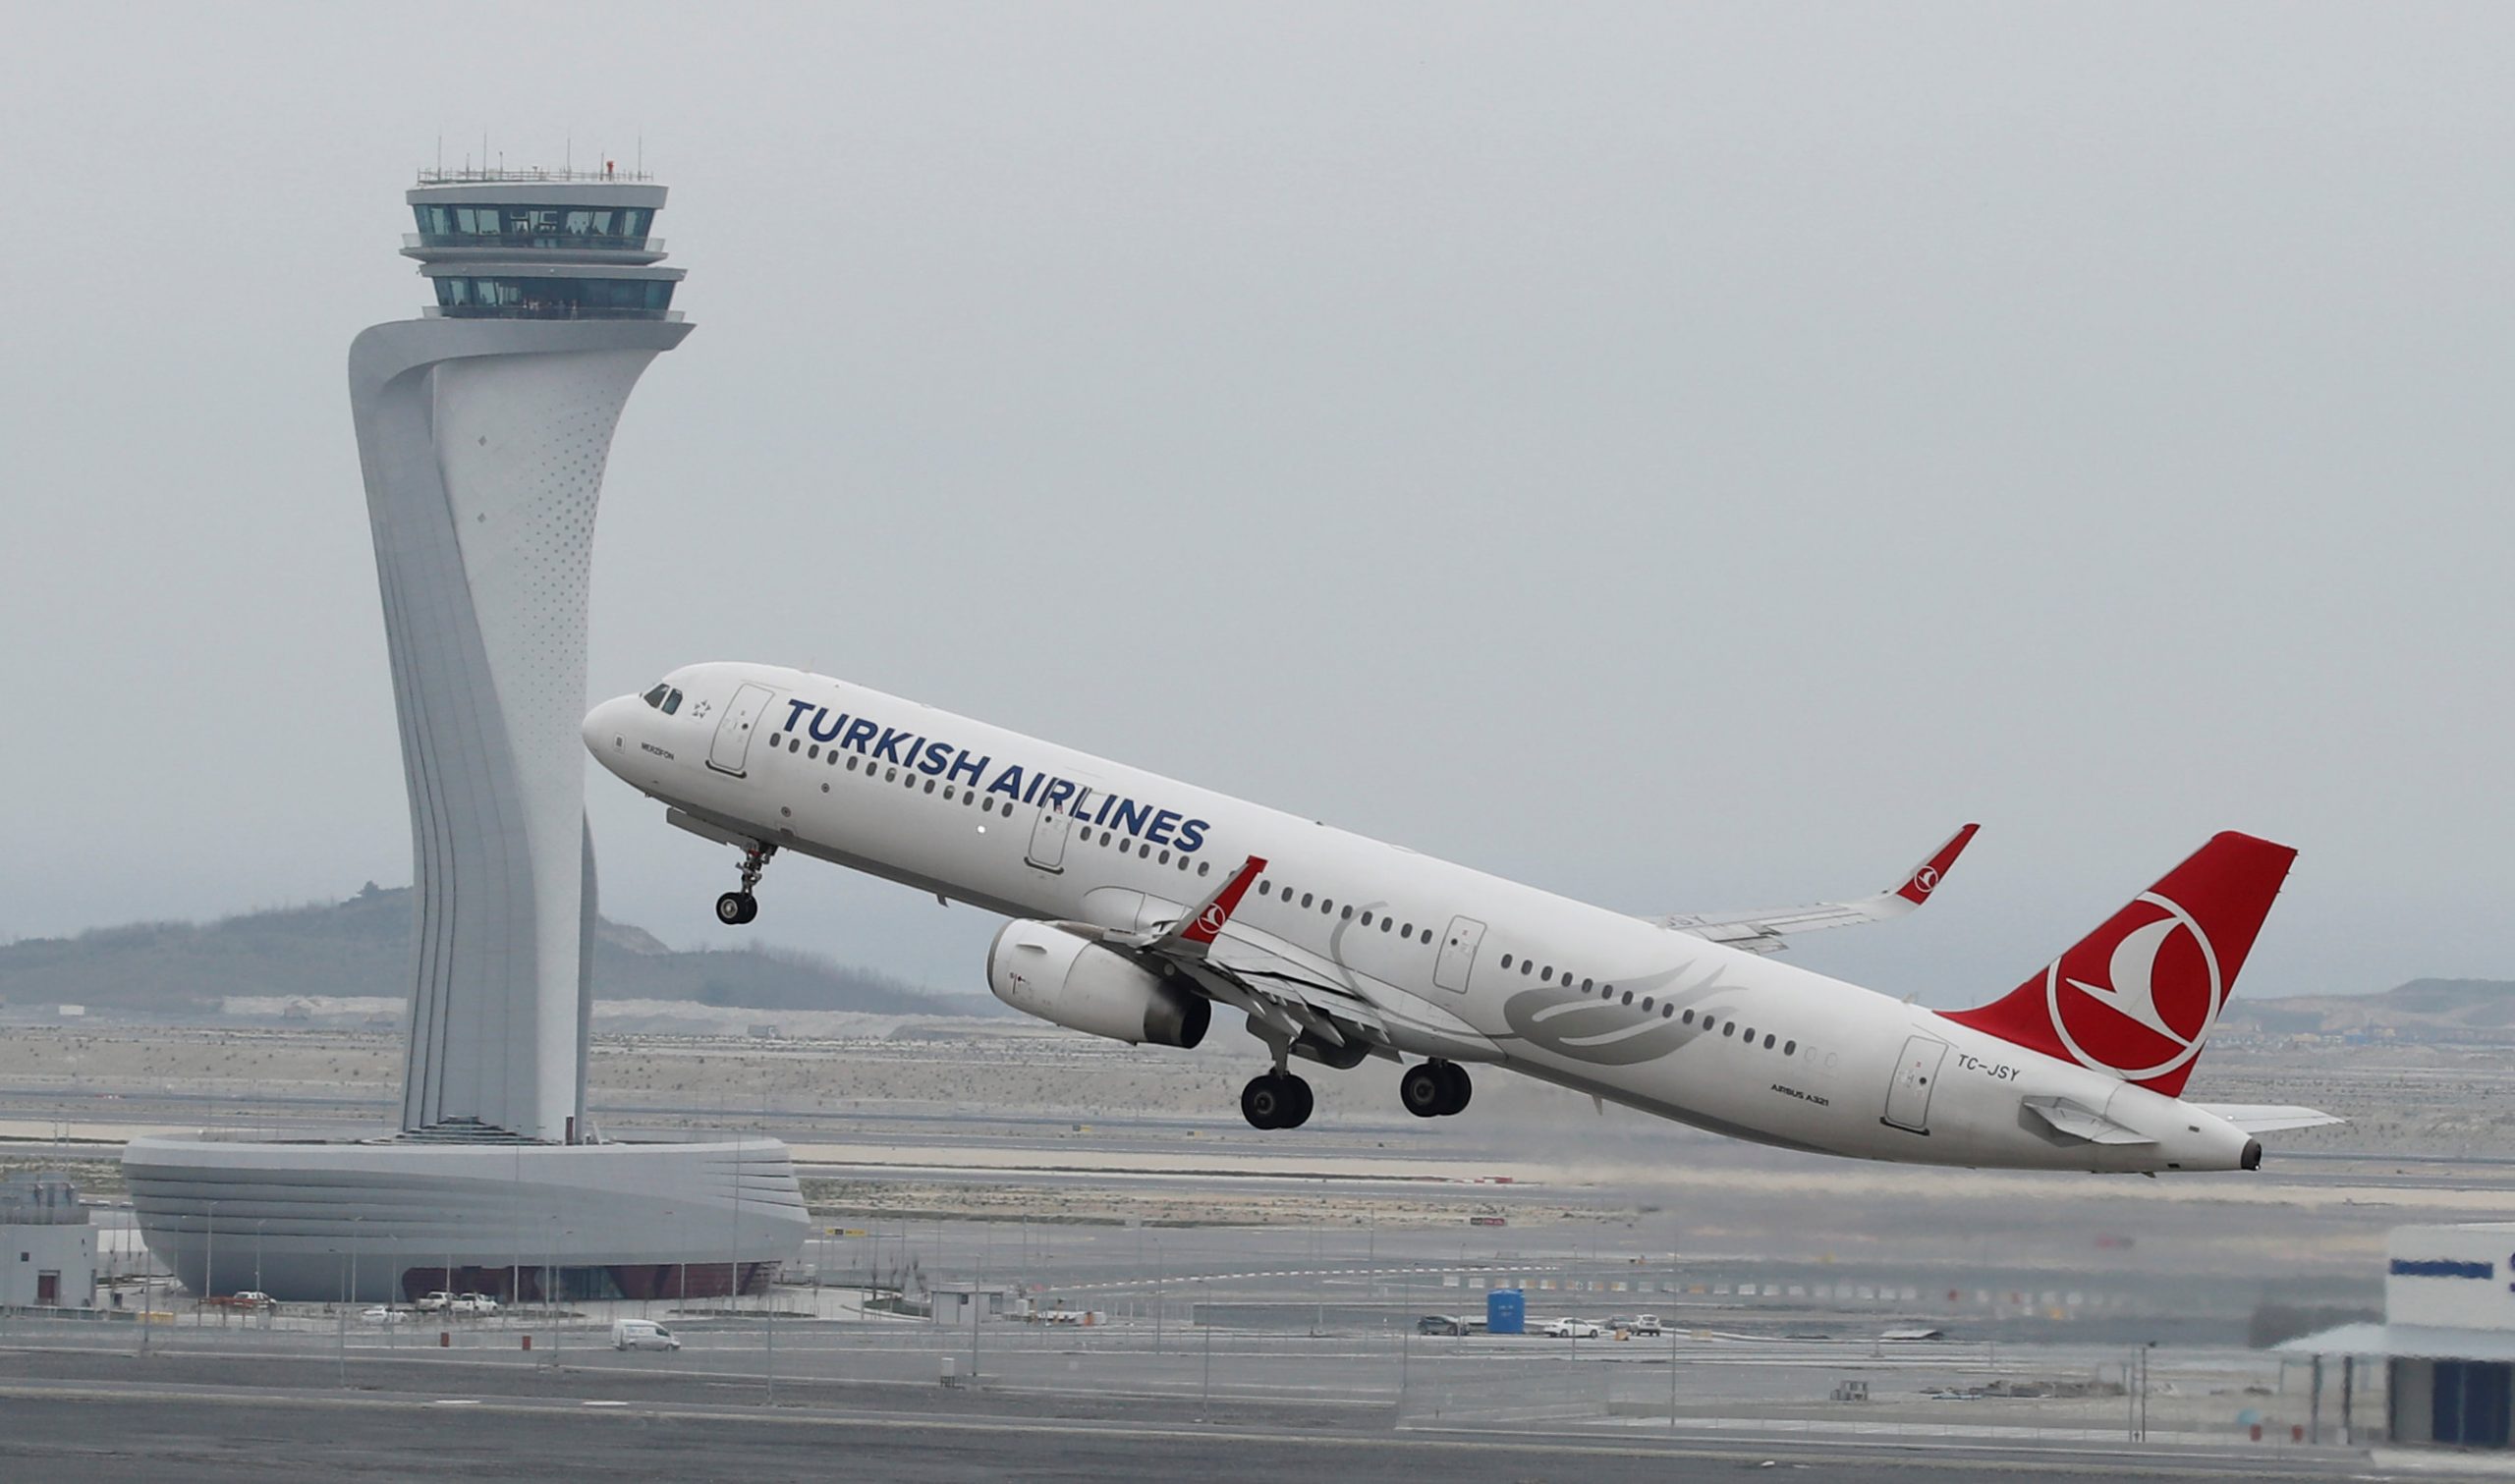 Turkish Airlines: In talks with Airbus for a huge deal to buy 355 aircraft – The Economist Post